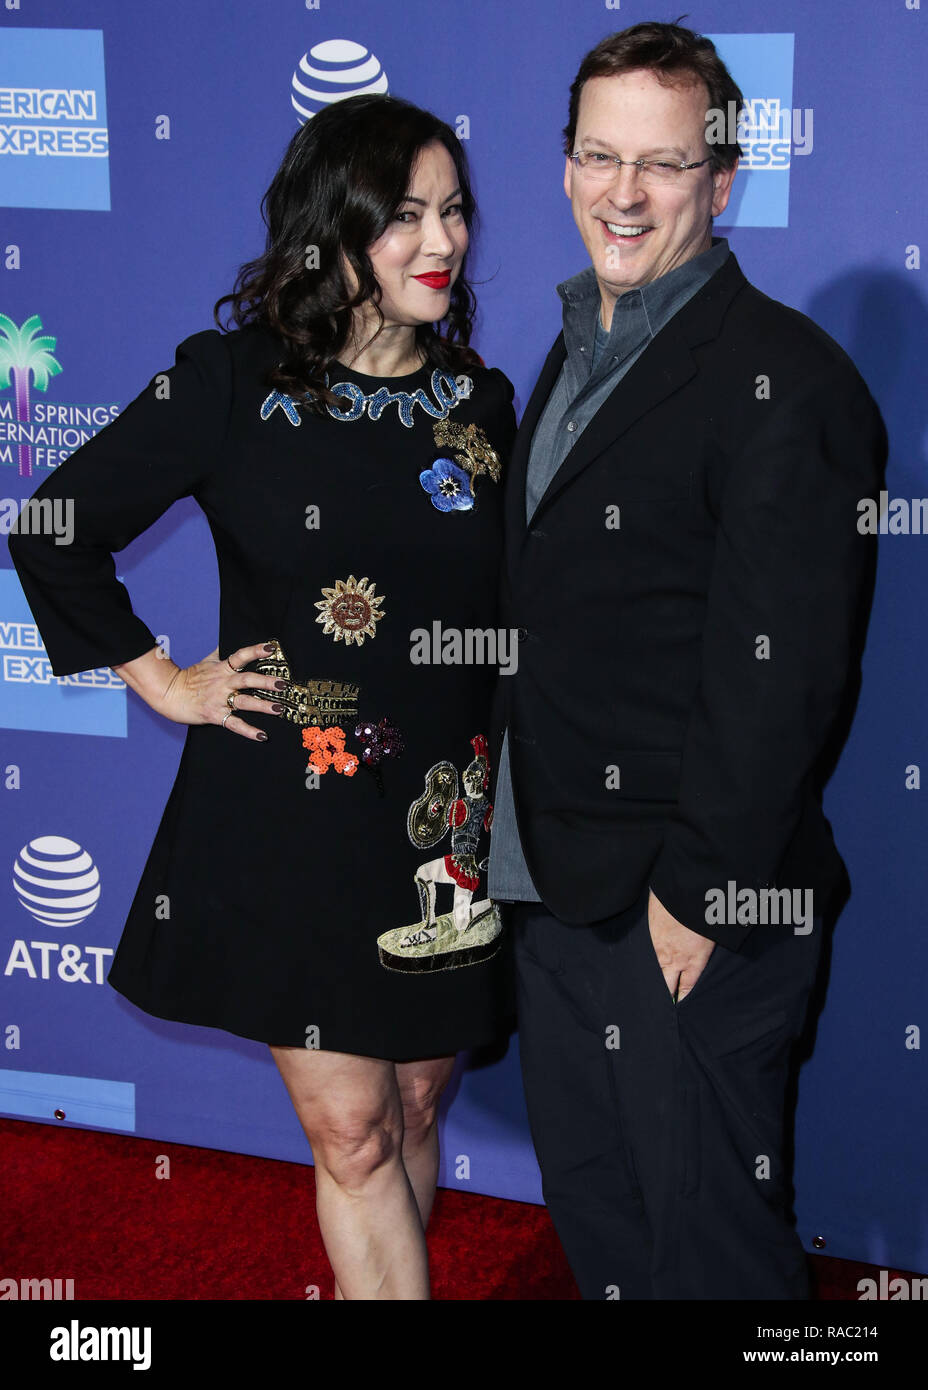 Palm Springs, California, USA. 3rd January, 2019. Jennifer Tilly and boyfriend Phil Laak arrive at the 30th Annual Palm Springs International Film Festival Awards Gala held at the Palm Springs Convention Center on January 3, 2019 in Palm Springs, California, United States. (Photo by Xavier Collin/Image Press Agency) Credit: Image Press Agency/Alamy Live News Stock Photo